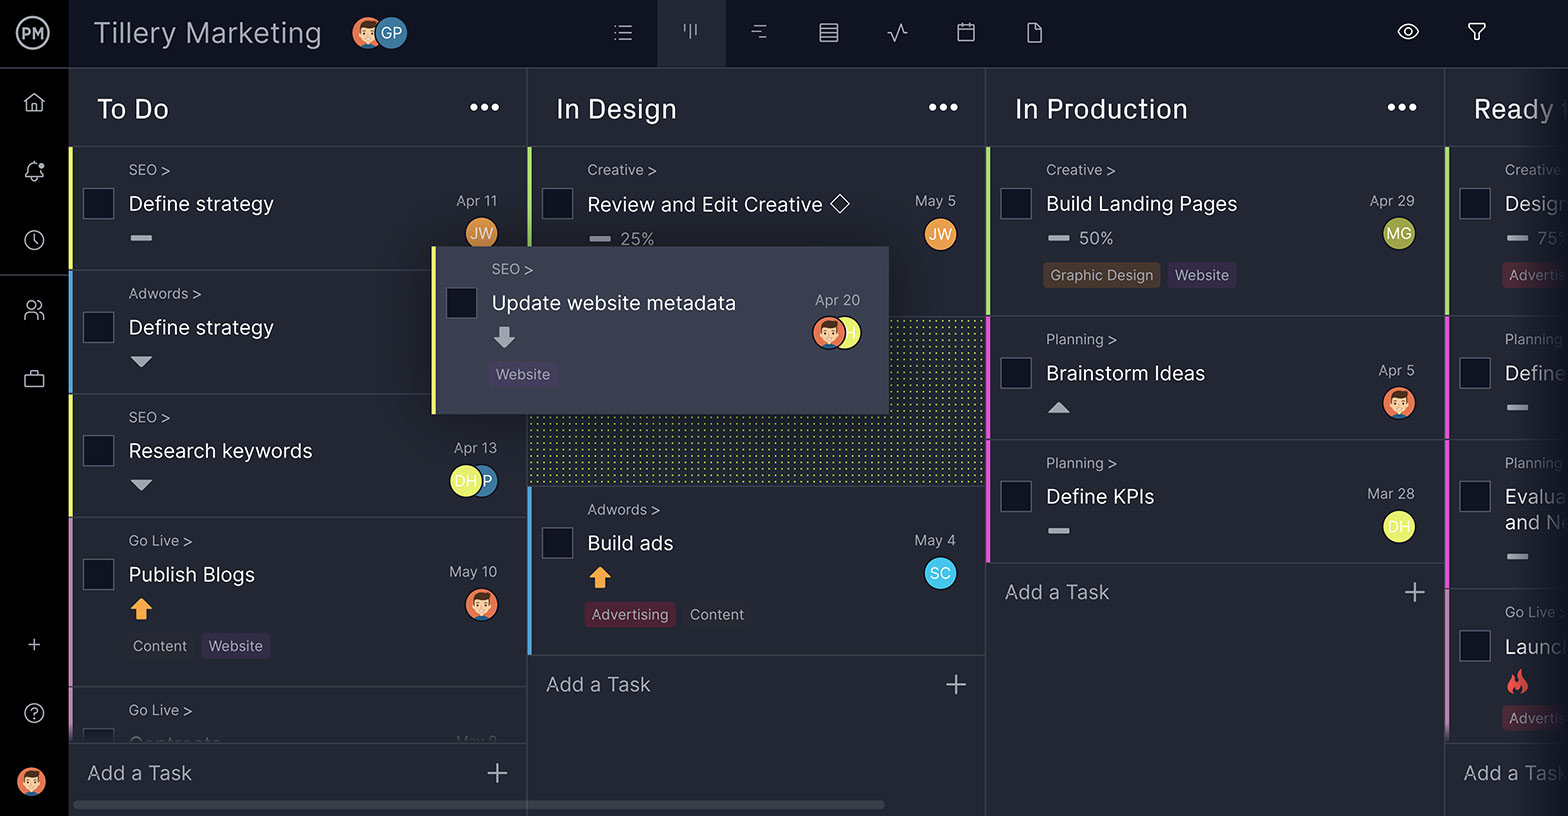 ProjectManager's kanban view